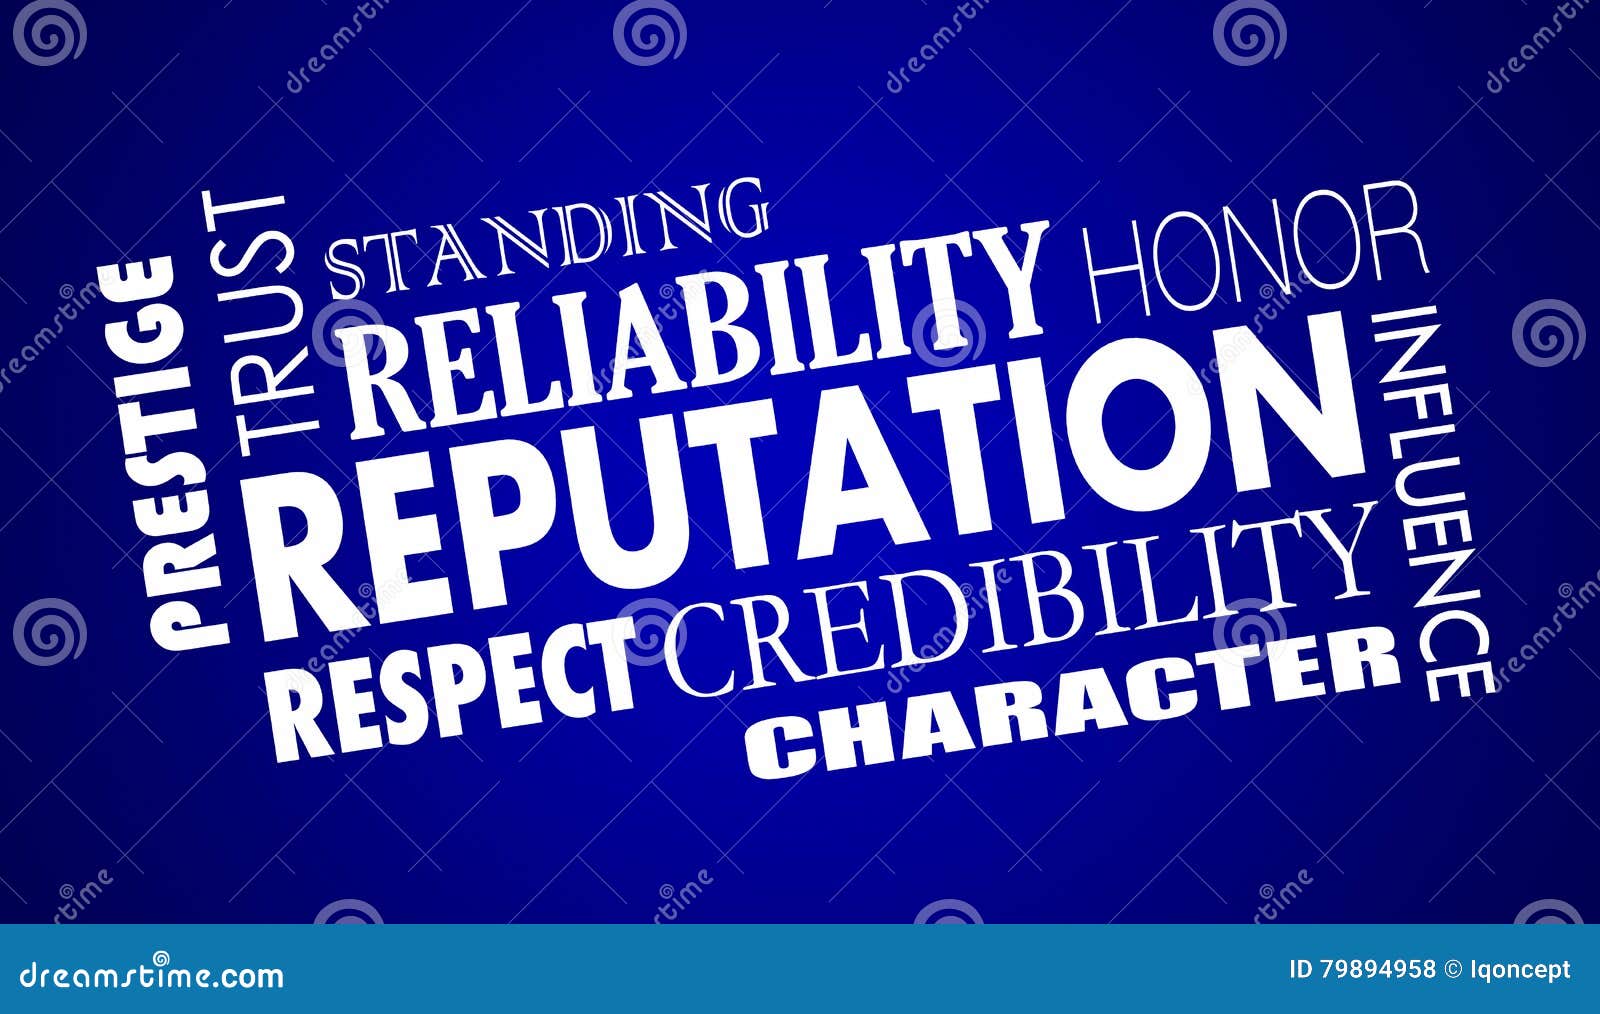 reputation trust credibility respect word collage